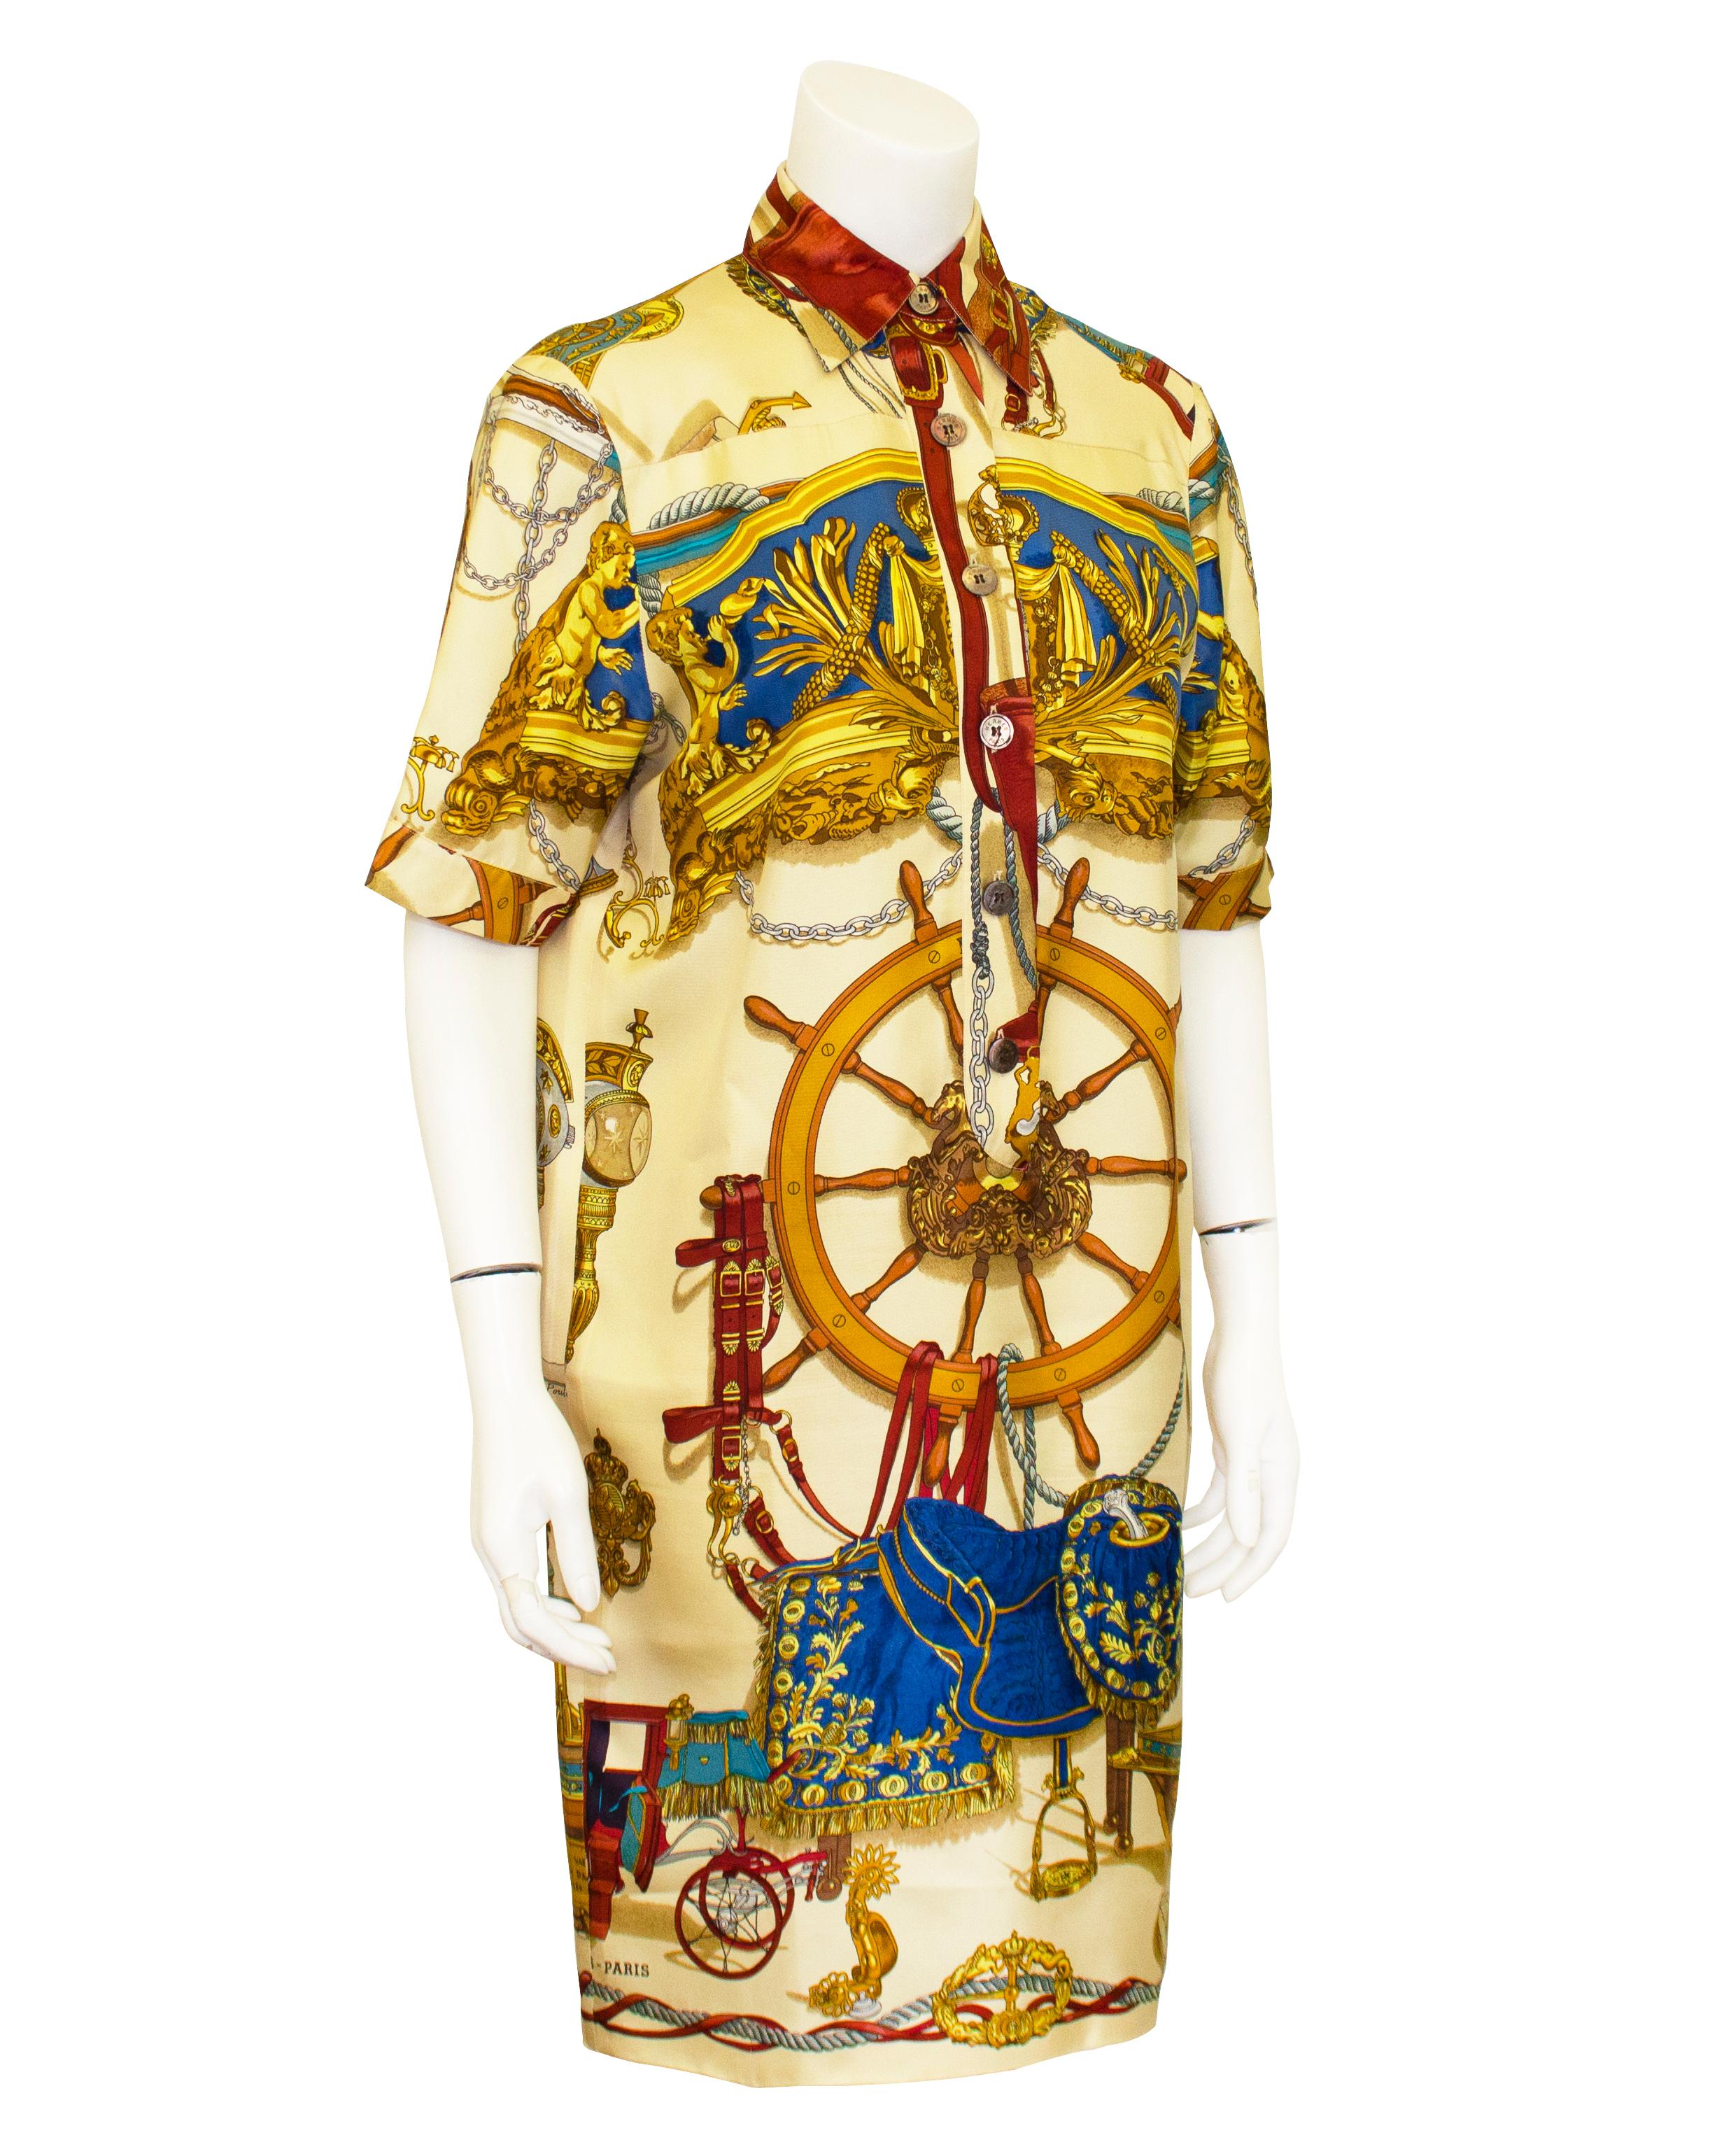 Beautiful Hermes dress from the 1990s. 100% silk with all over classic ornate Hermes print featuring maroon, royal blue, gold silver and brown motifs like horse bridals, anchors, ship steering wheels, horse carriages and ornate french baroque